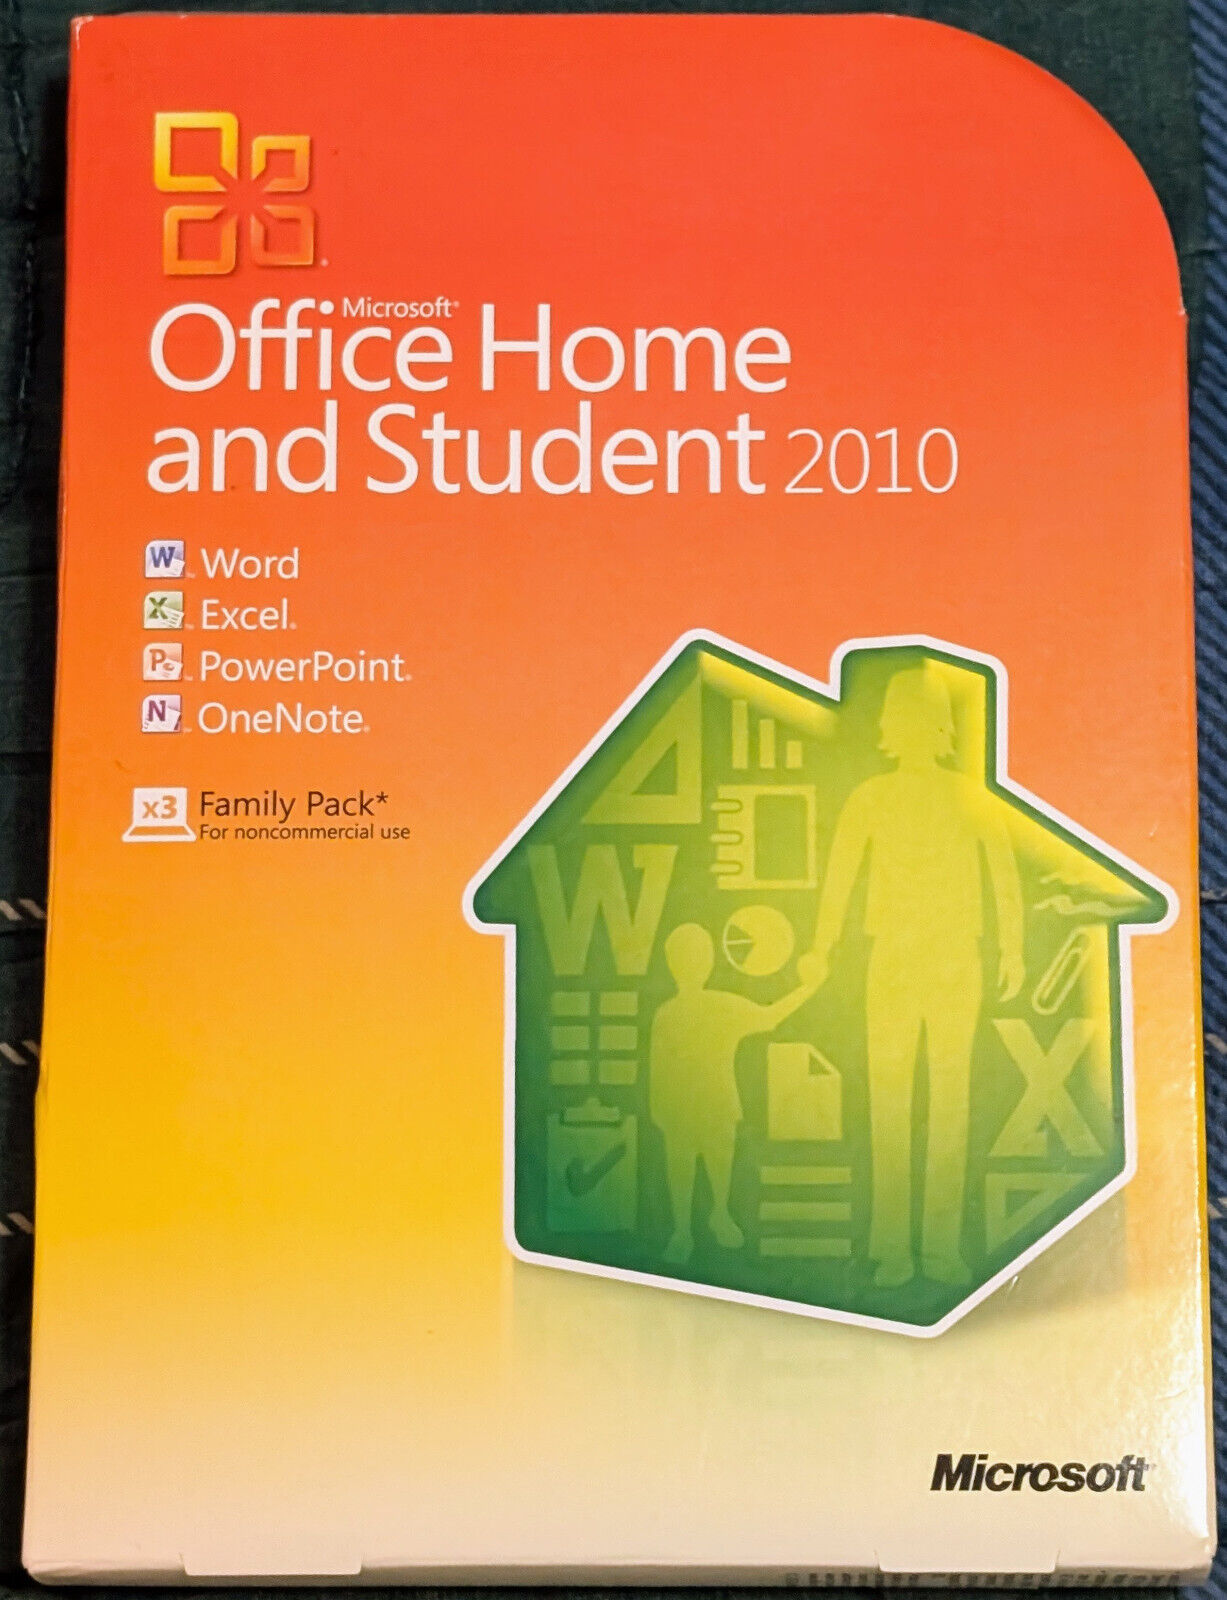 Microsoft Office Home and Student 2010 Software (79G-02144) - No License Key